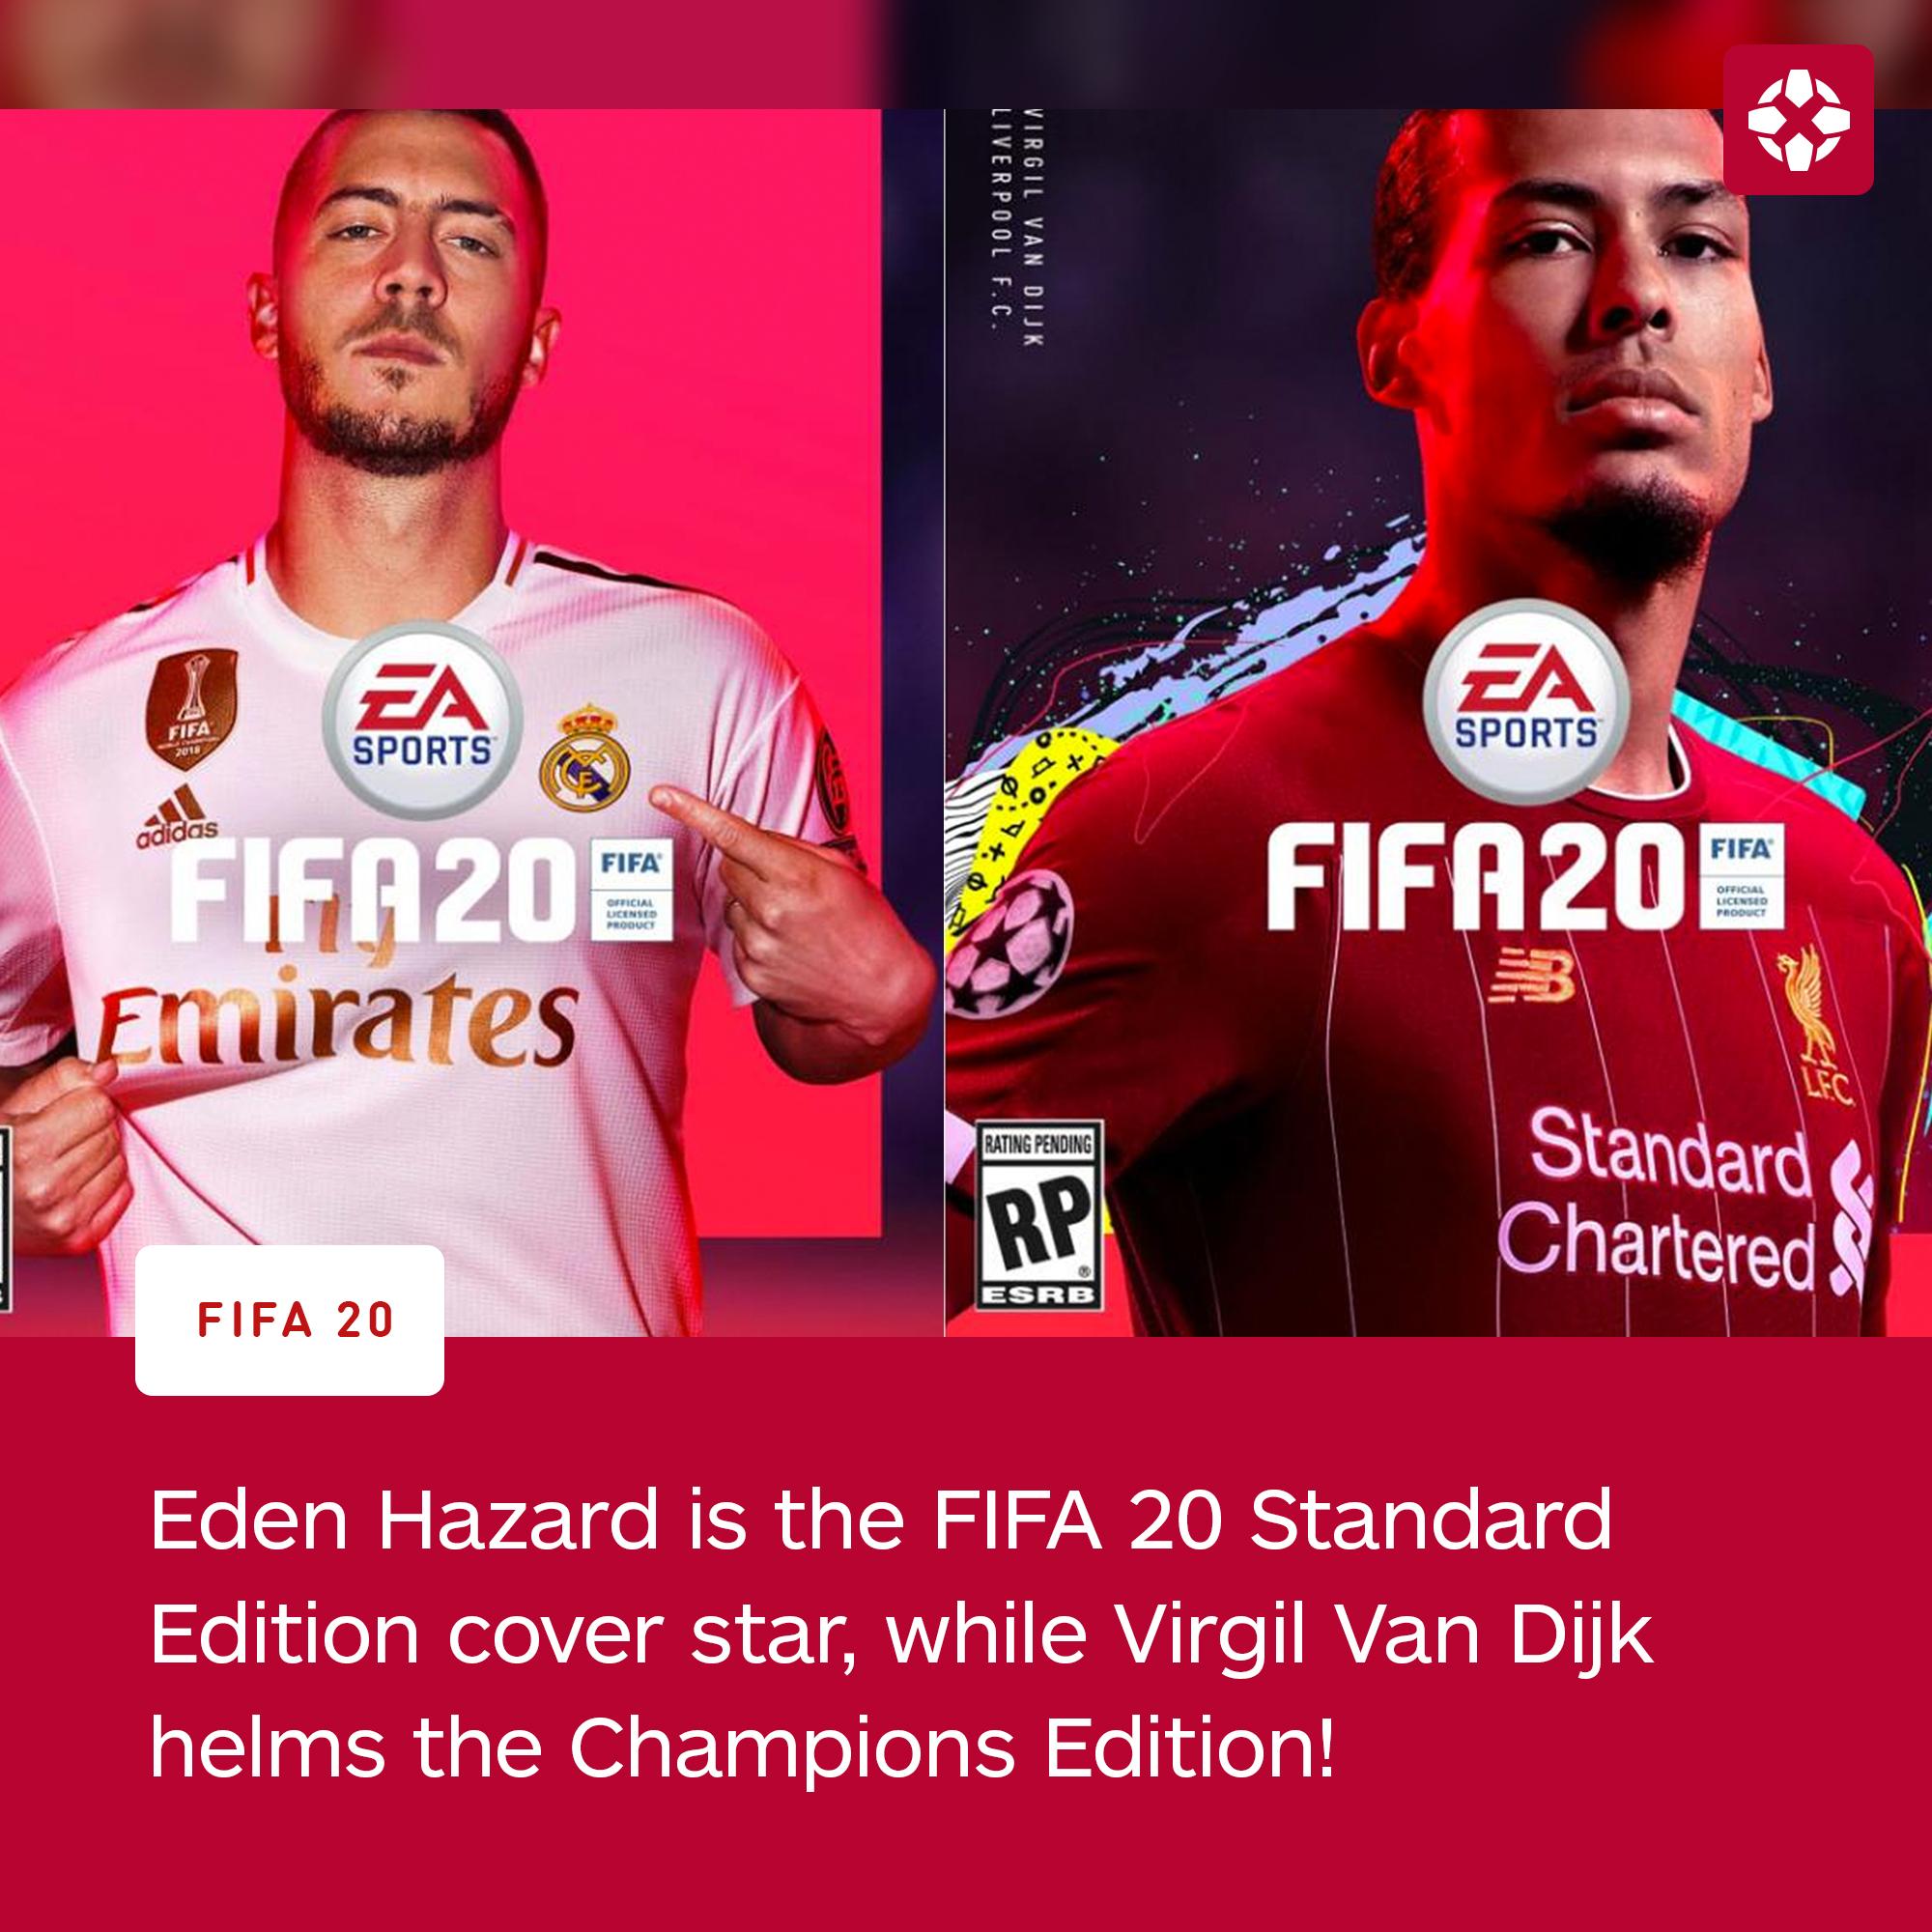 IGN on Twitter: "The FIFA 20 Standard Edition and Champions Edition cover stars have been revealed, and the Ultimate Edition cover star will be revealed soon... https://t.co/xWw85BiekU" /